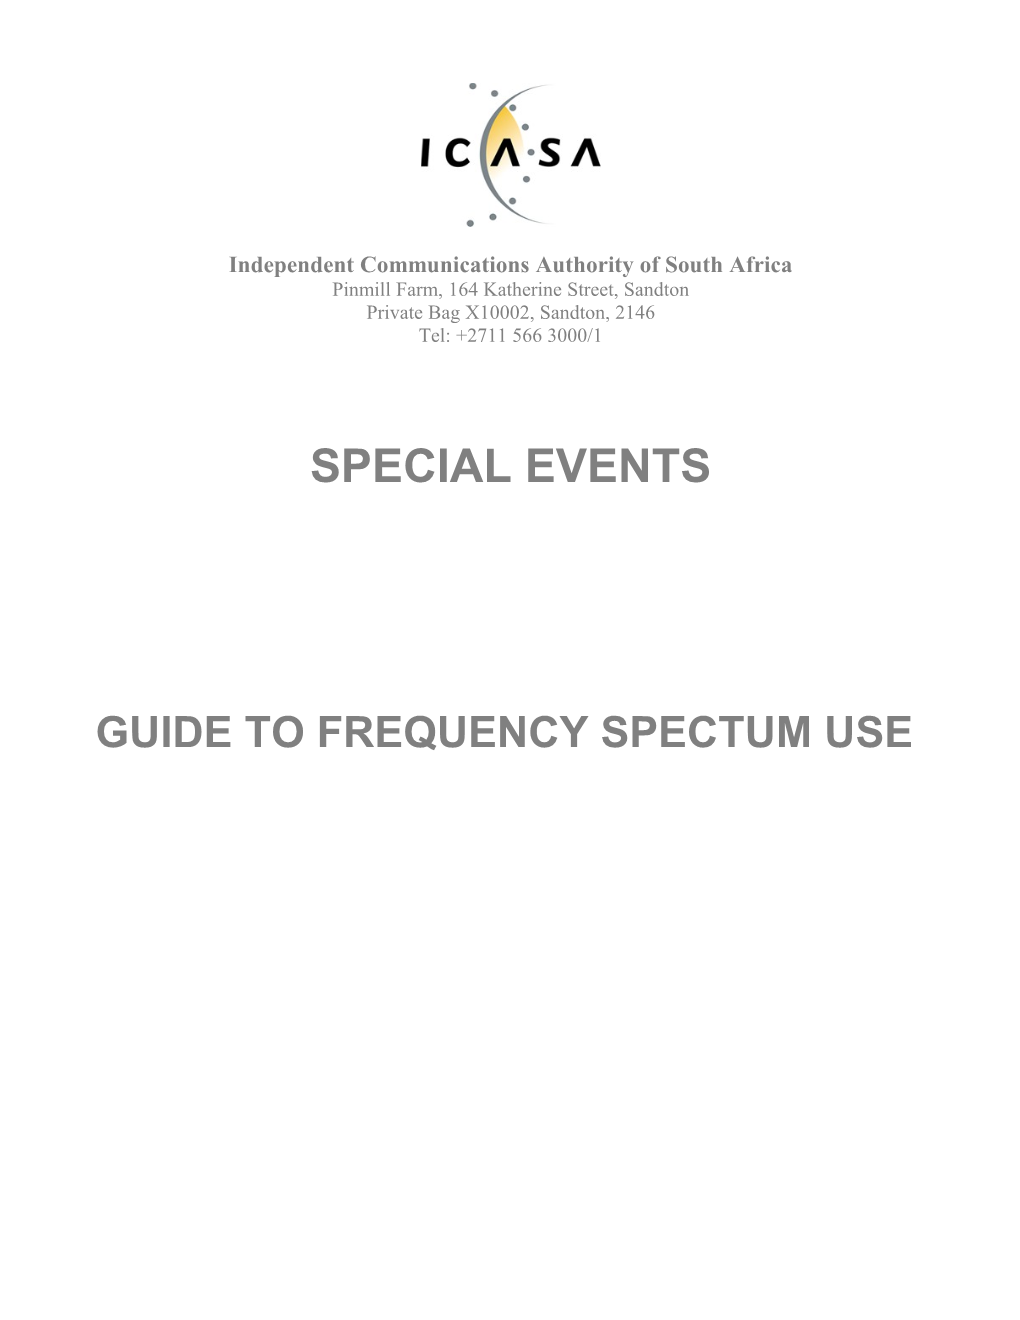 Frequency Assignment Guide for Special Events